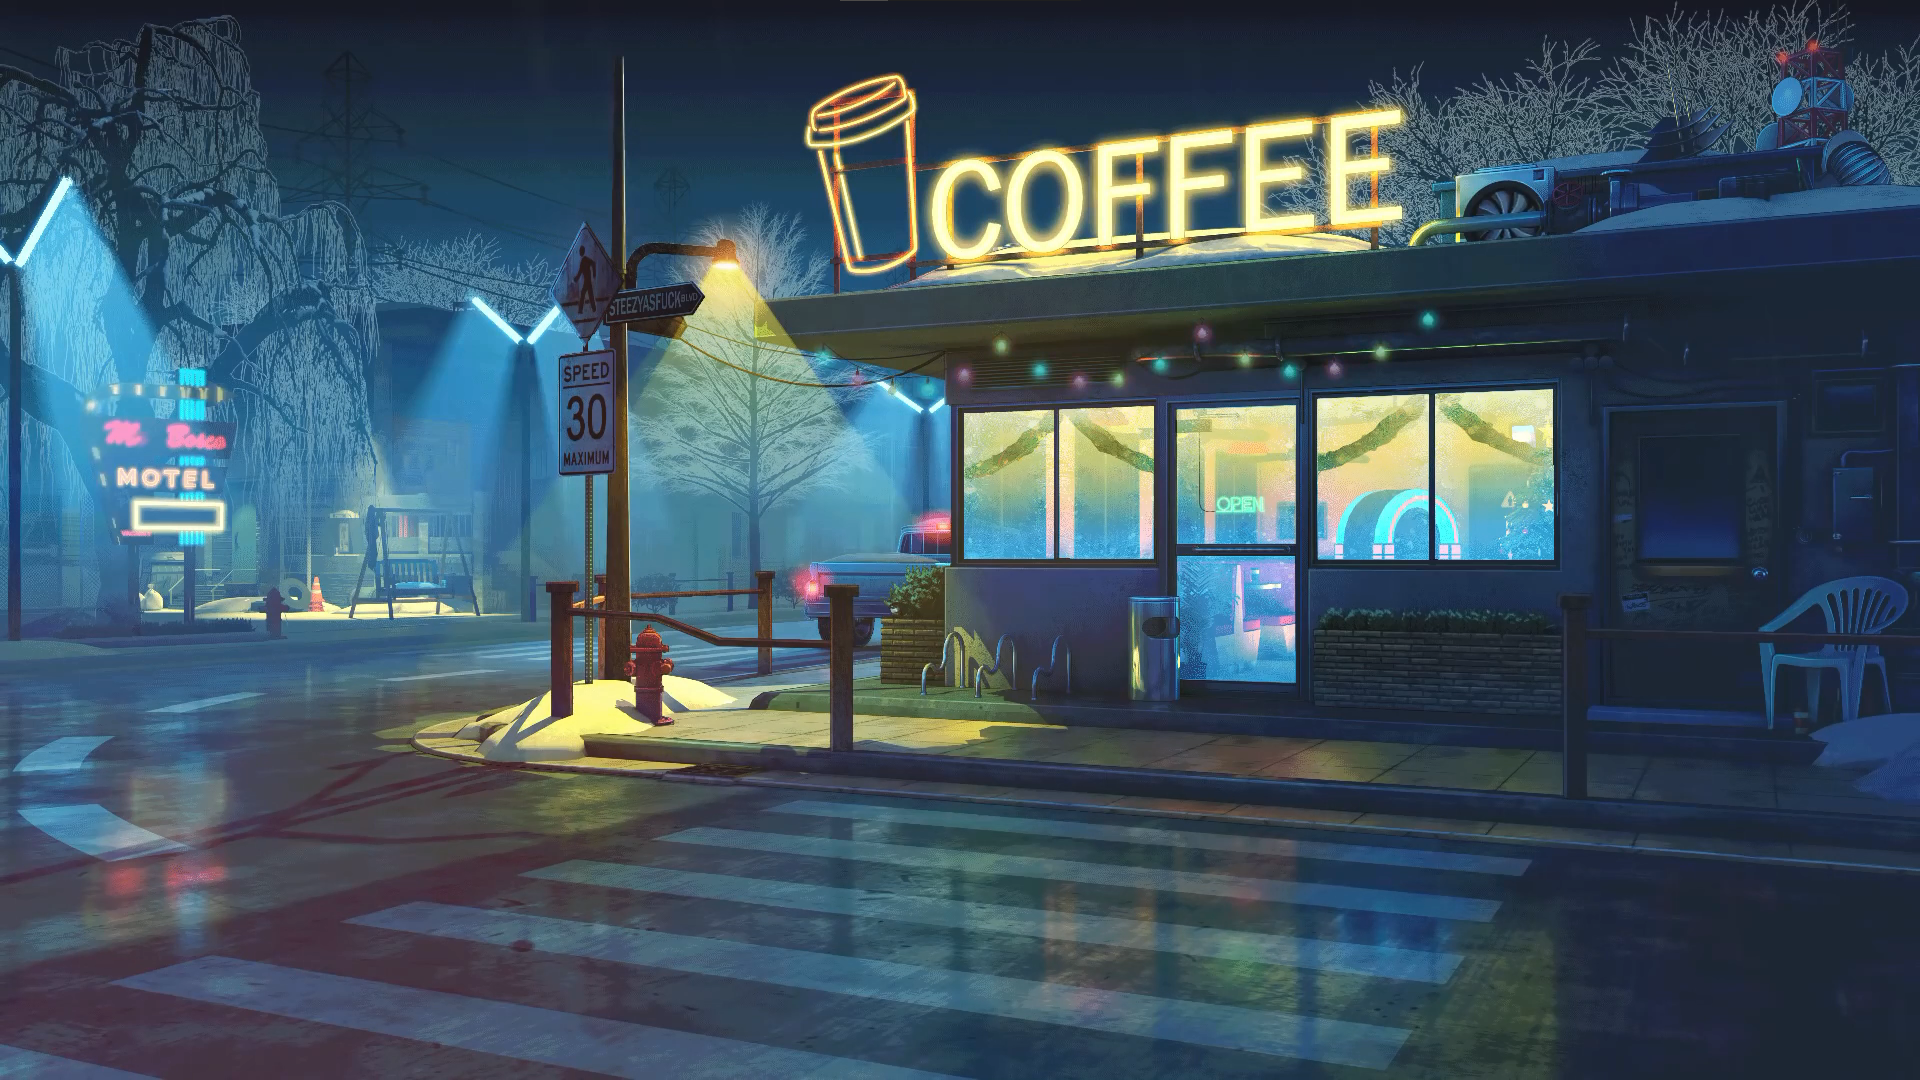 Cafe Diner Night Coffee Bar Neon Sign 1920x1080